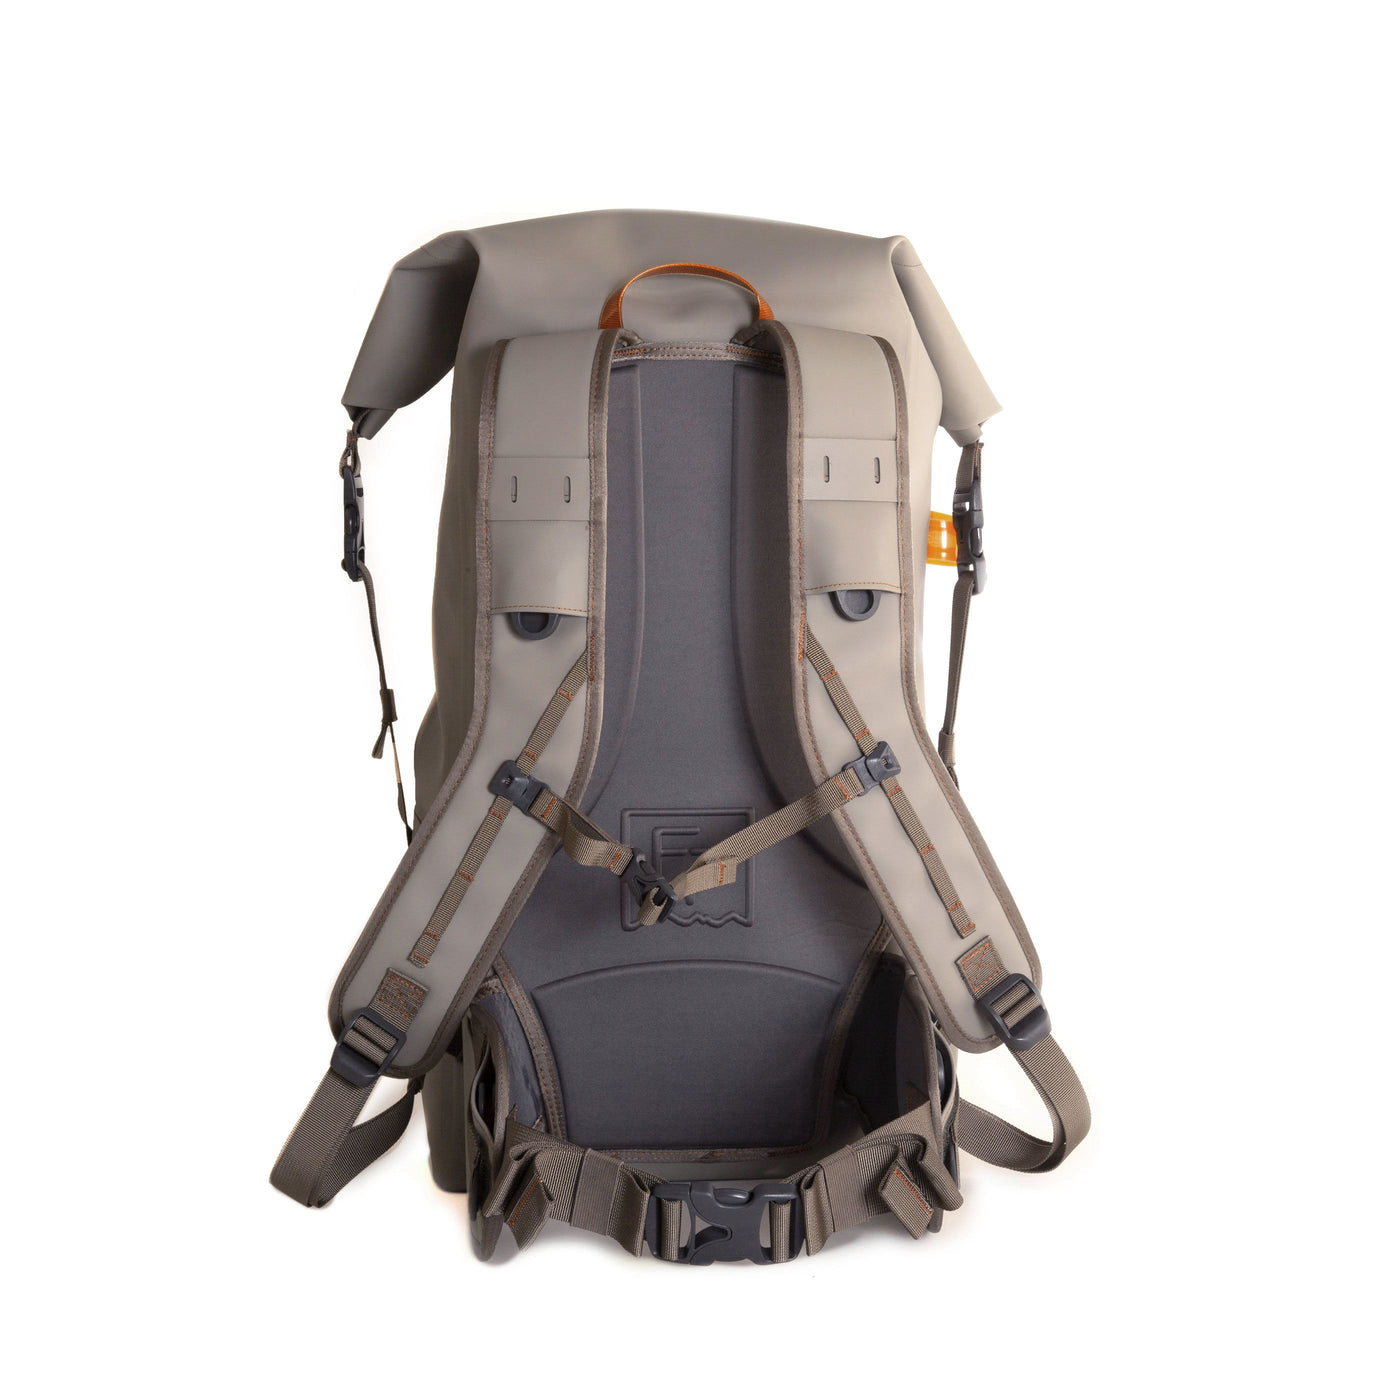 FISHPOND THUNDERHEAD CHEST PACK - SHALE (PACK ONLY) - Total Outfitters